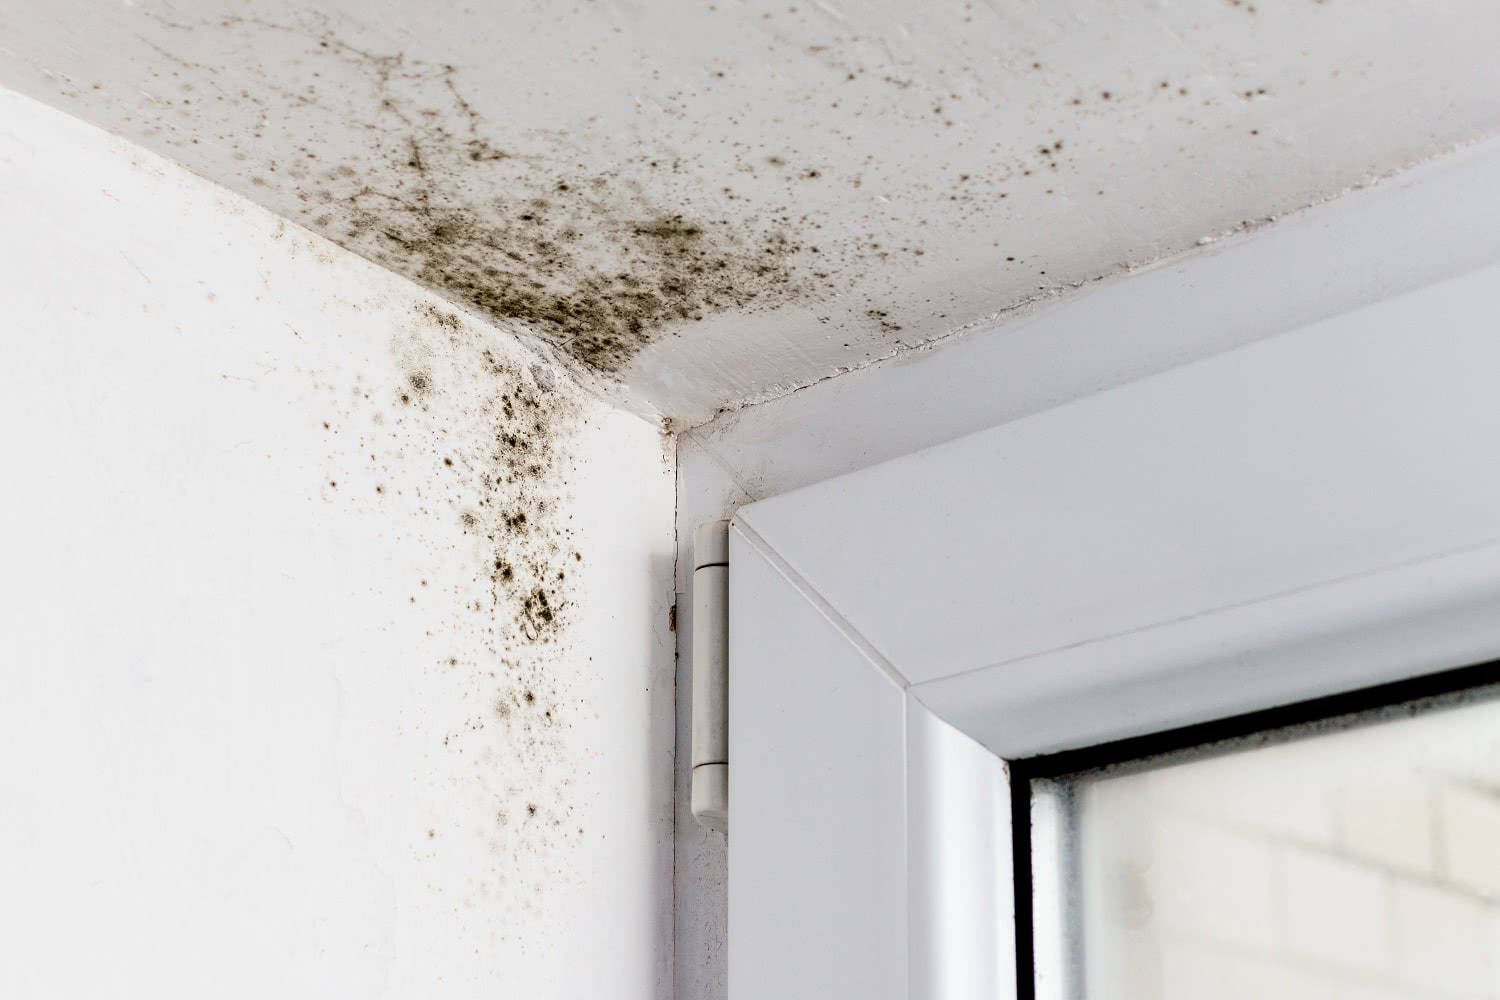 HOW CAN i get help with mold removal Doylestown Pa